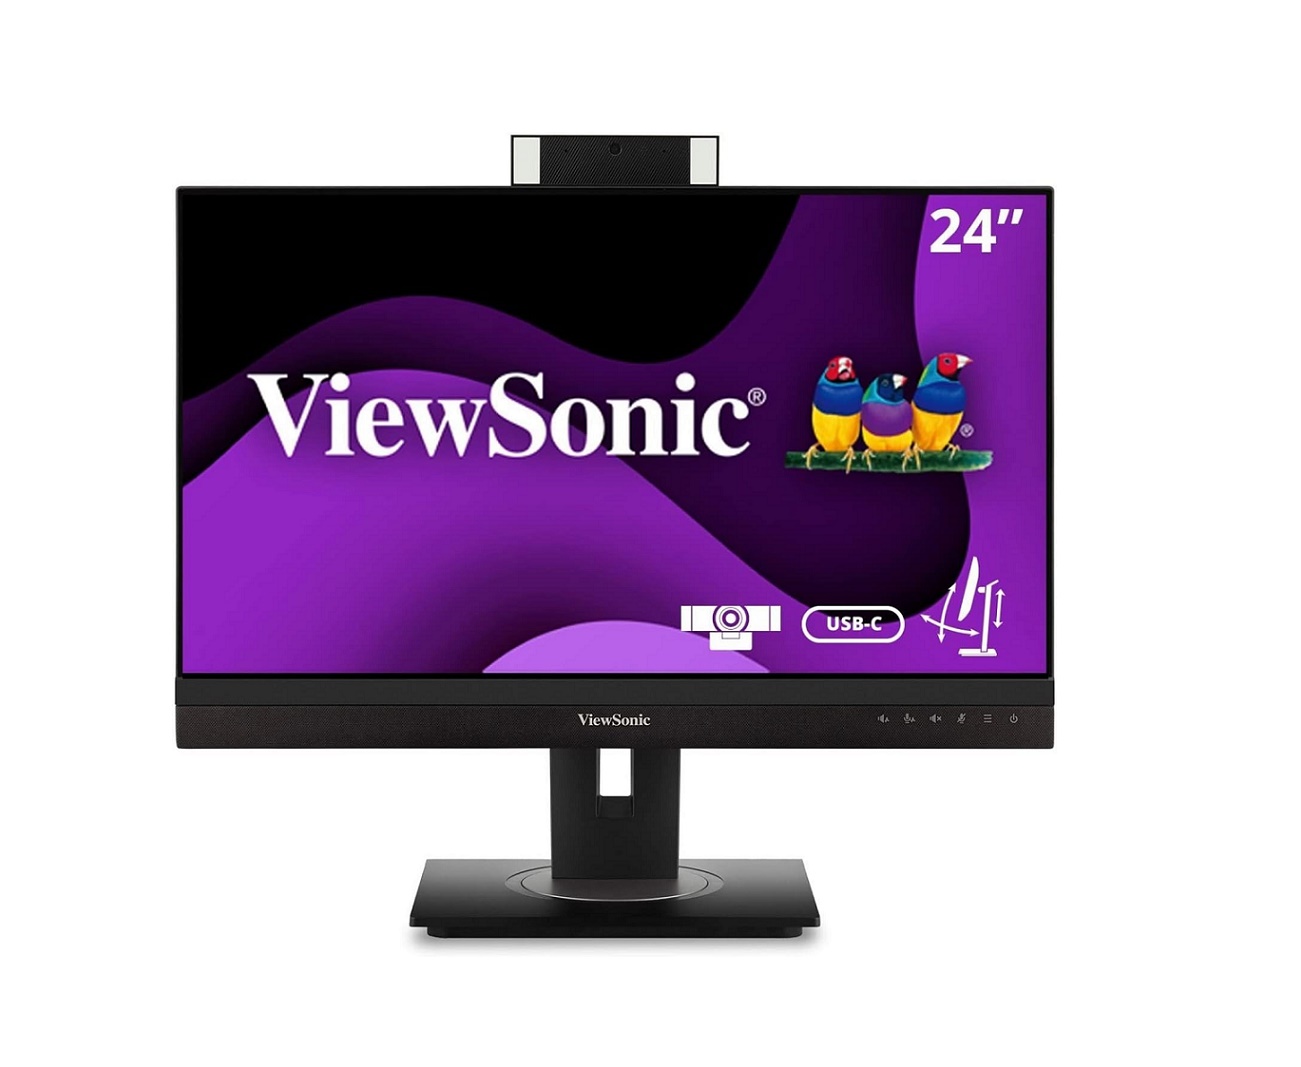 Viewsonic 23.8 1080p Conferencing Monitor With Webcam VG2456V